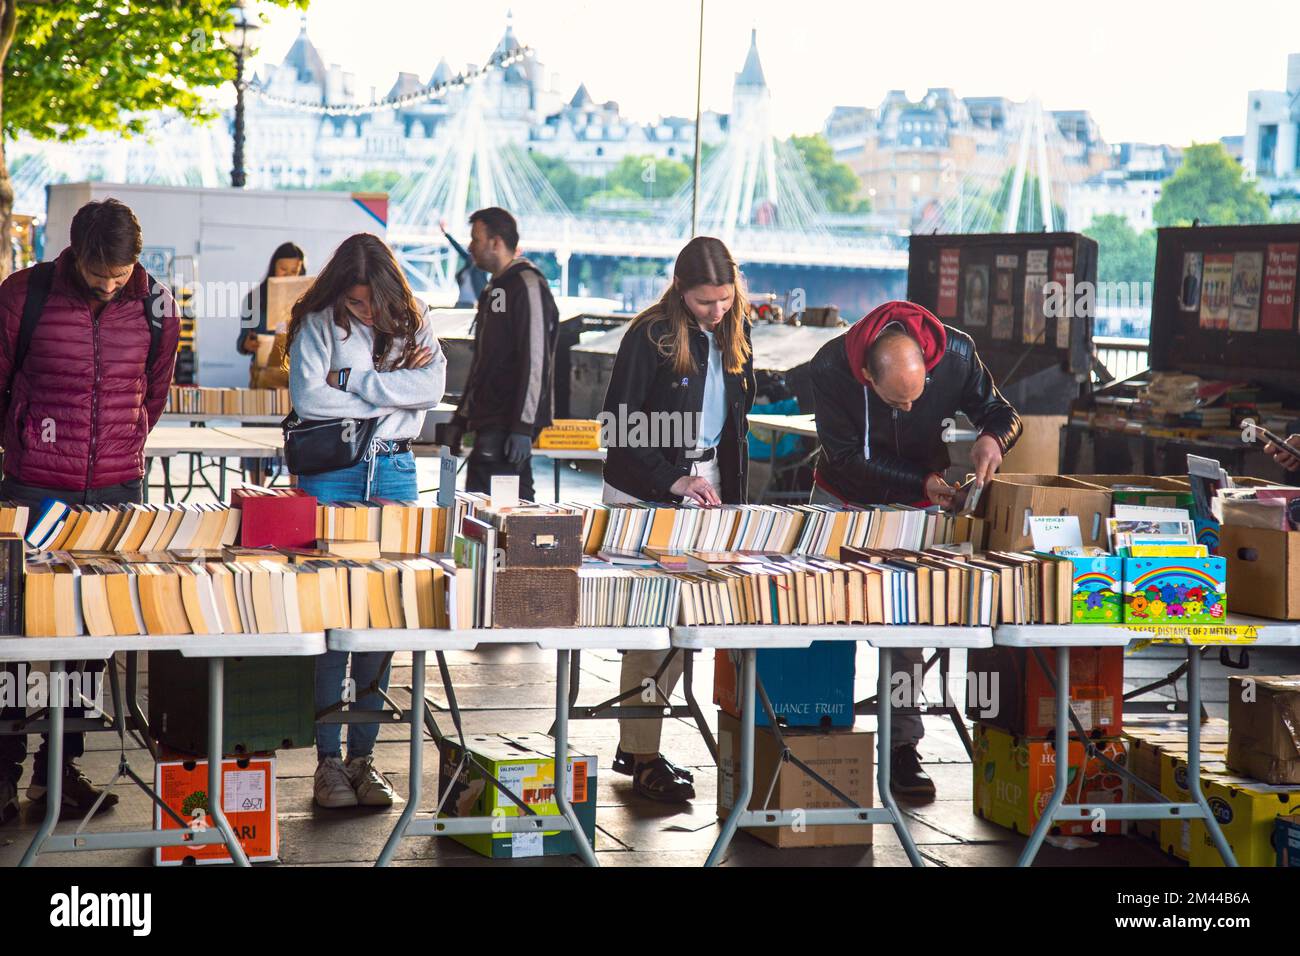 People browsing books at the Southbank Centre Book Market stall, London, UK Stock Photo